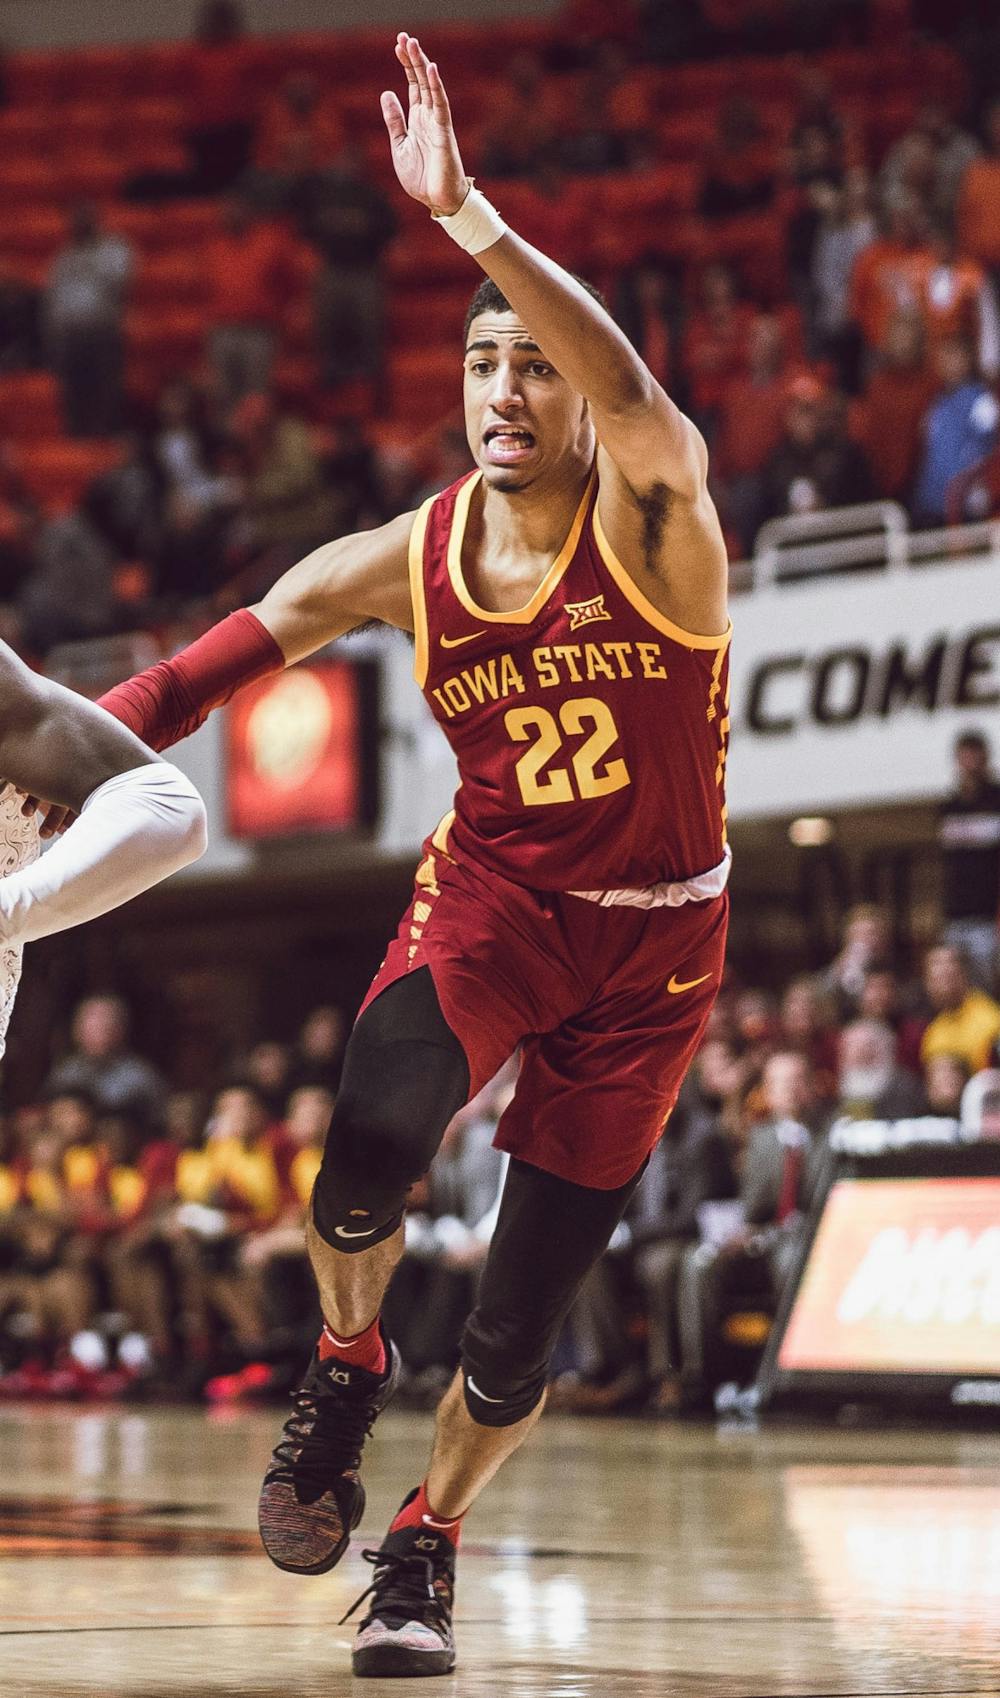 <p>Indiana Pacers guard Tyrese Haliburton competes for the Iowa State Cyclones against the Oklahoma State Cowboys Jan. 2, 2019. Haliburton was traded to the Pacers from the Sacrmento Kings Feb. 8. <em><strong>Photo Credit: Courtney Bay/OSU Athletics</strong></em></p>